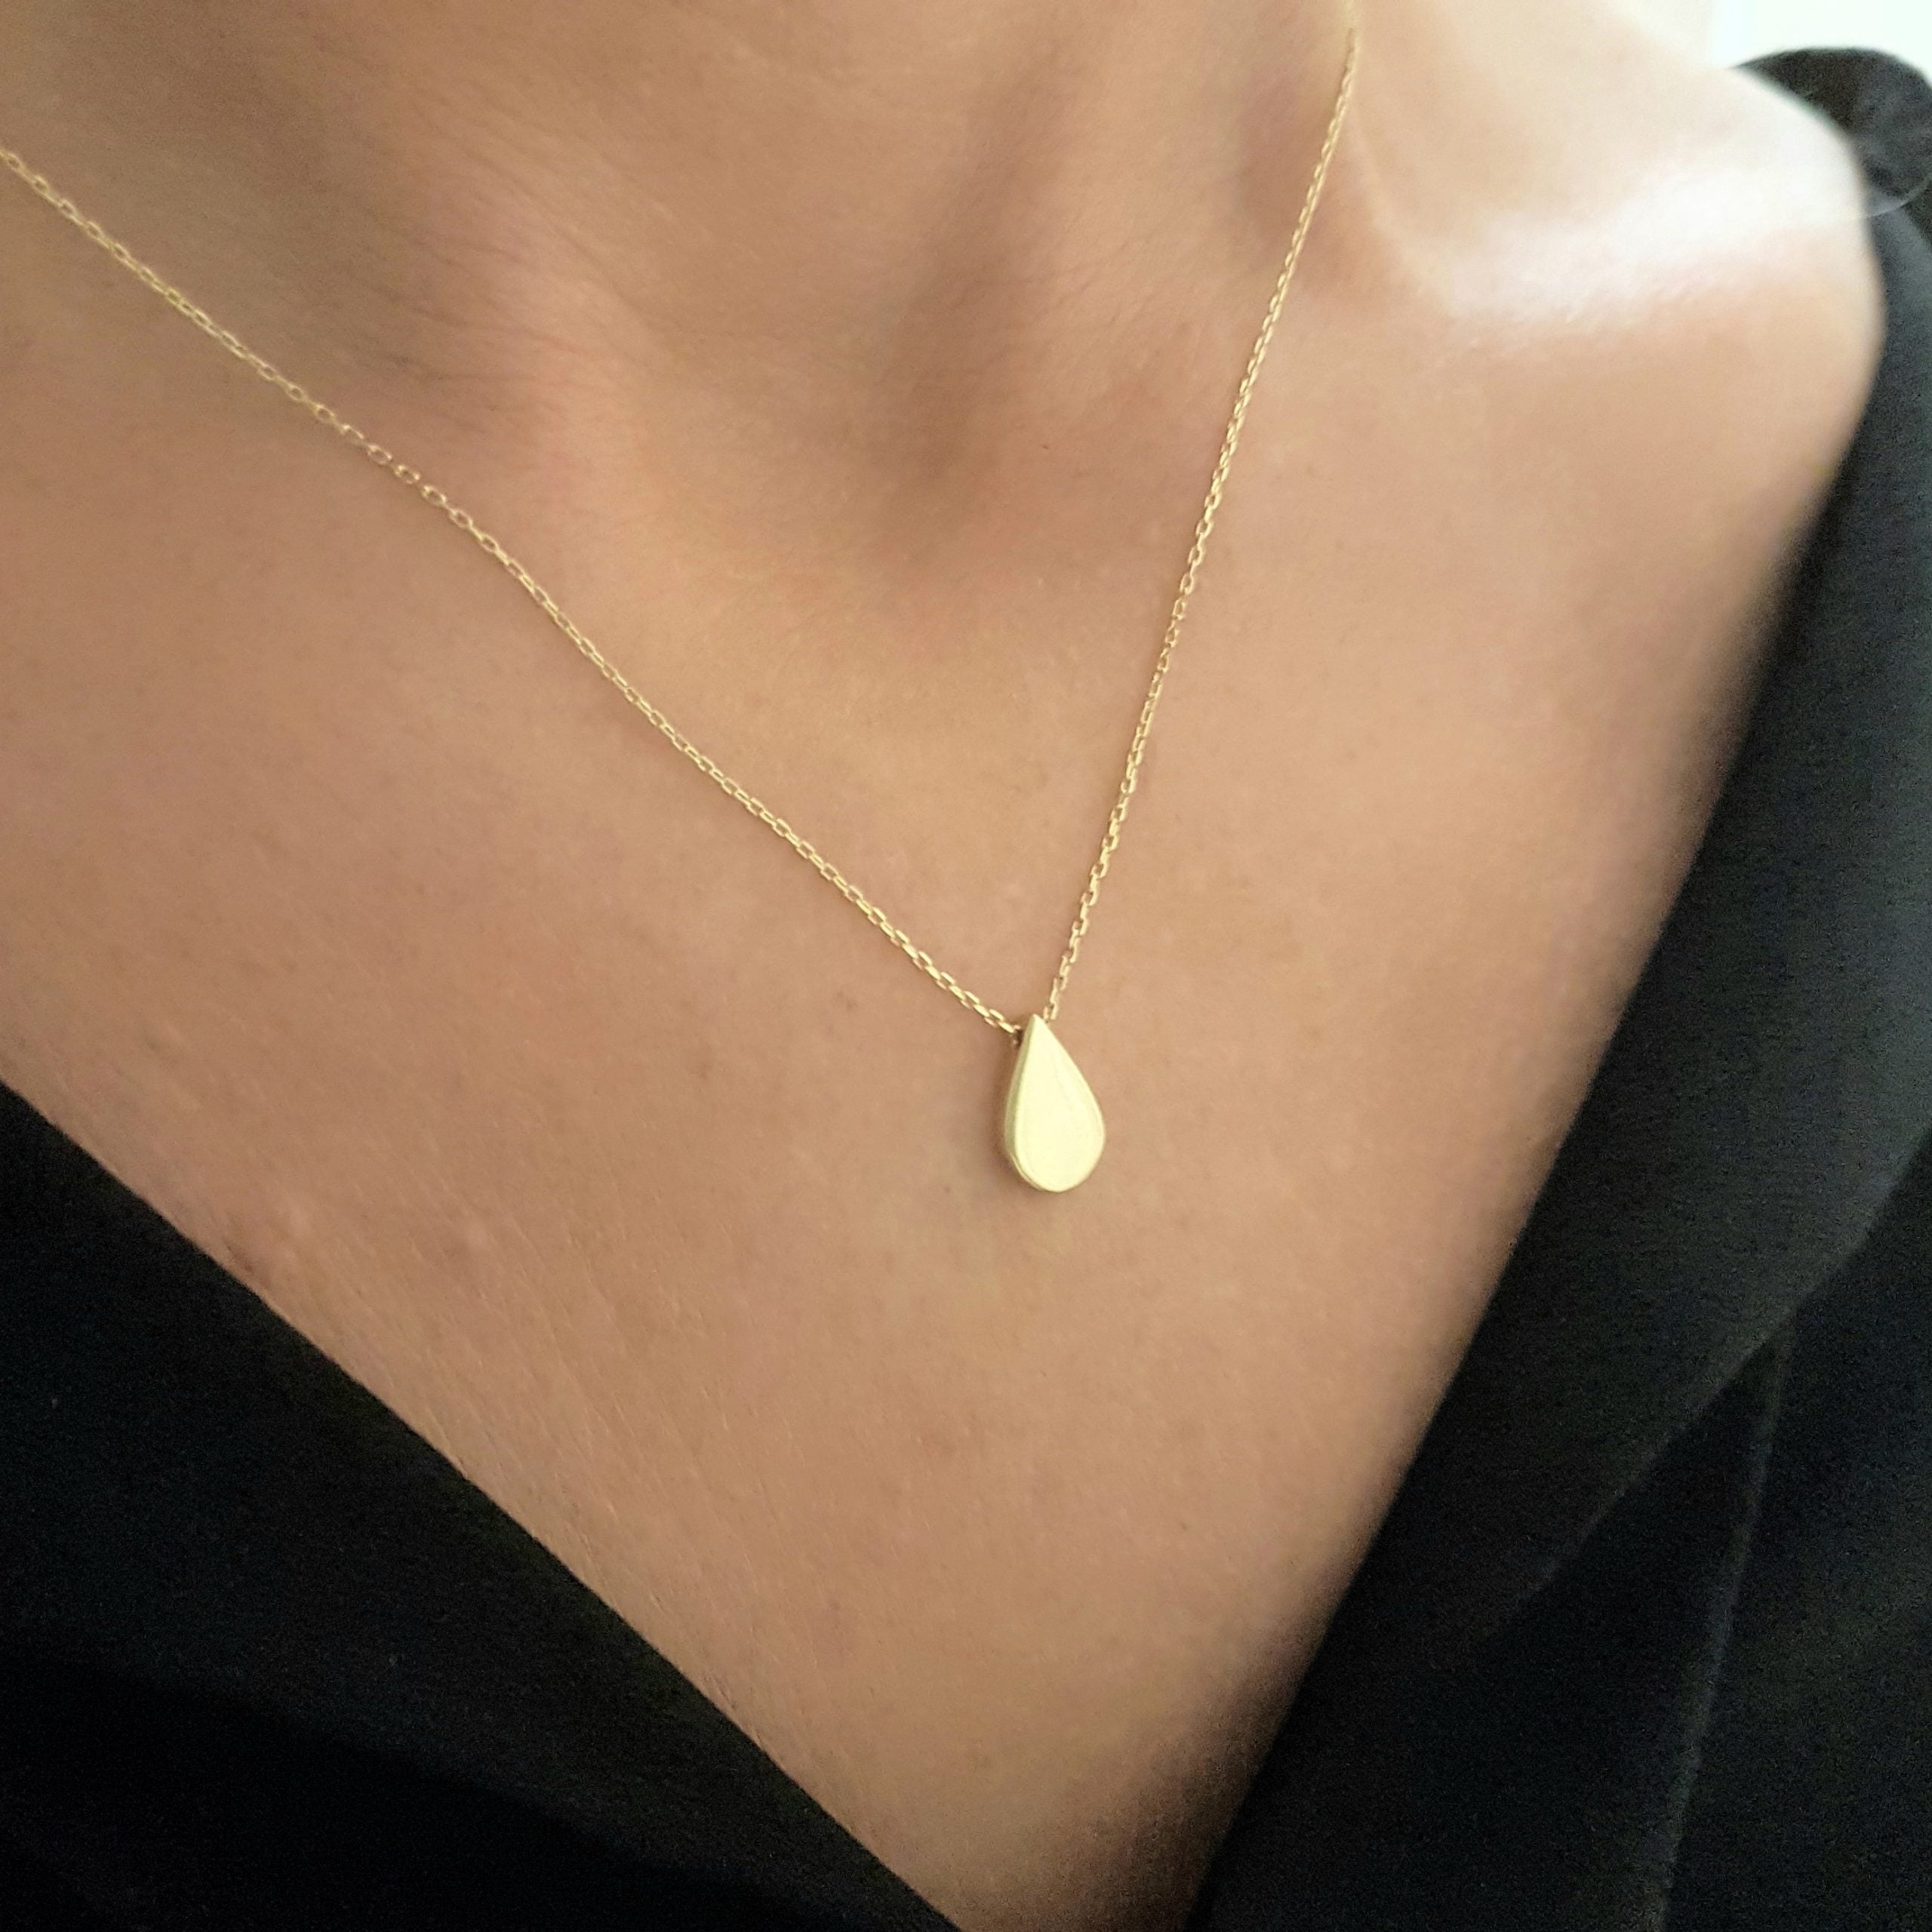 14K Real Solid Gold Tear Drop Design Pendant Necklace Gift for Women